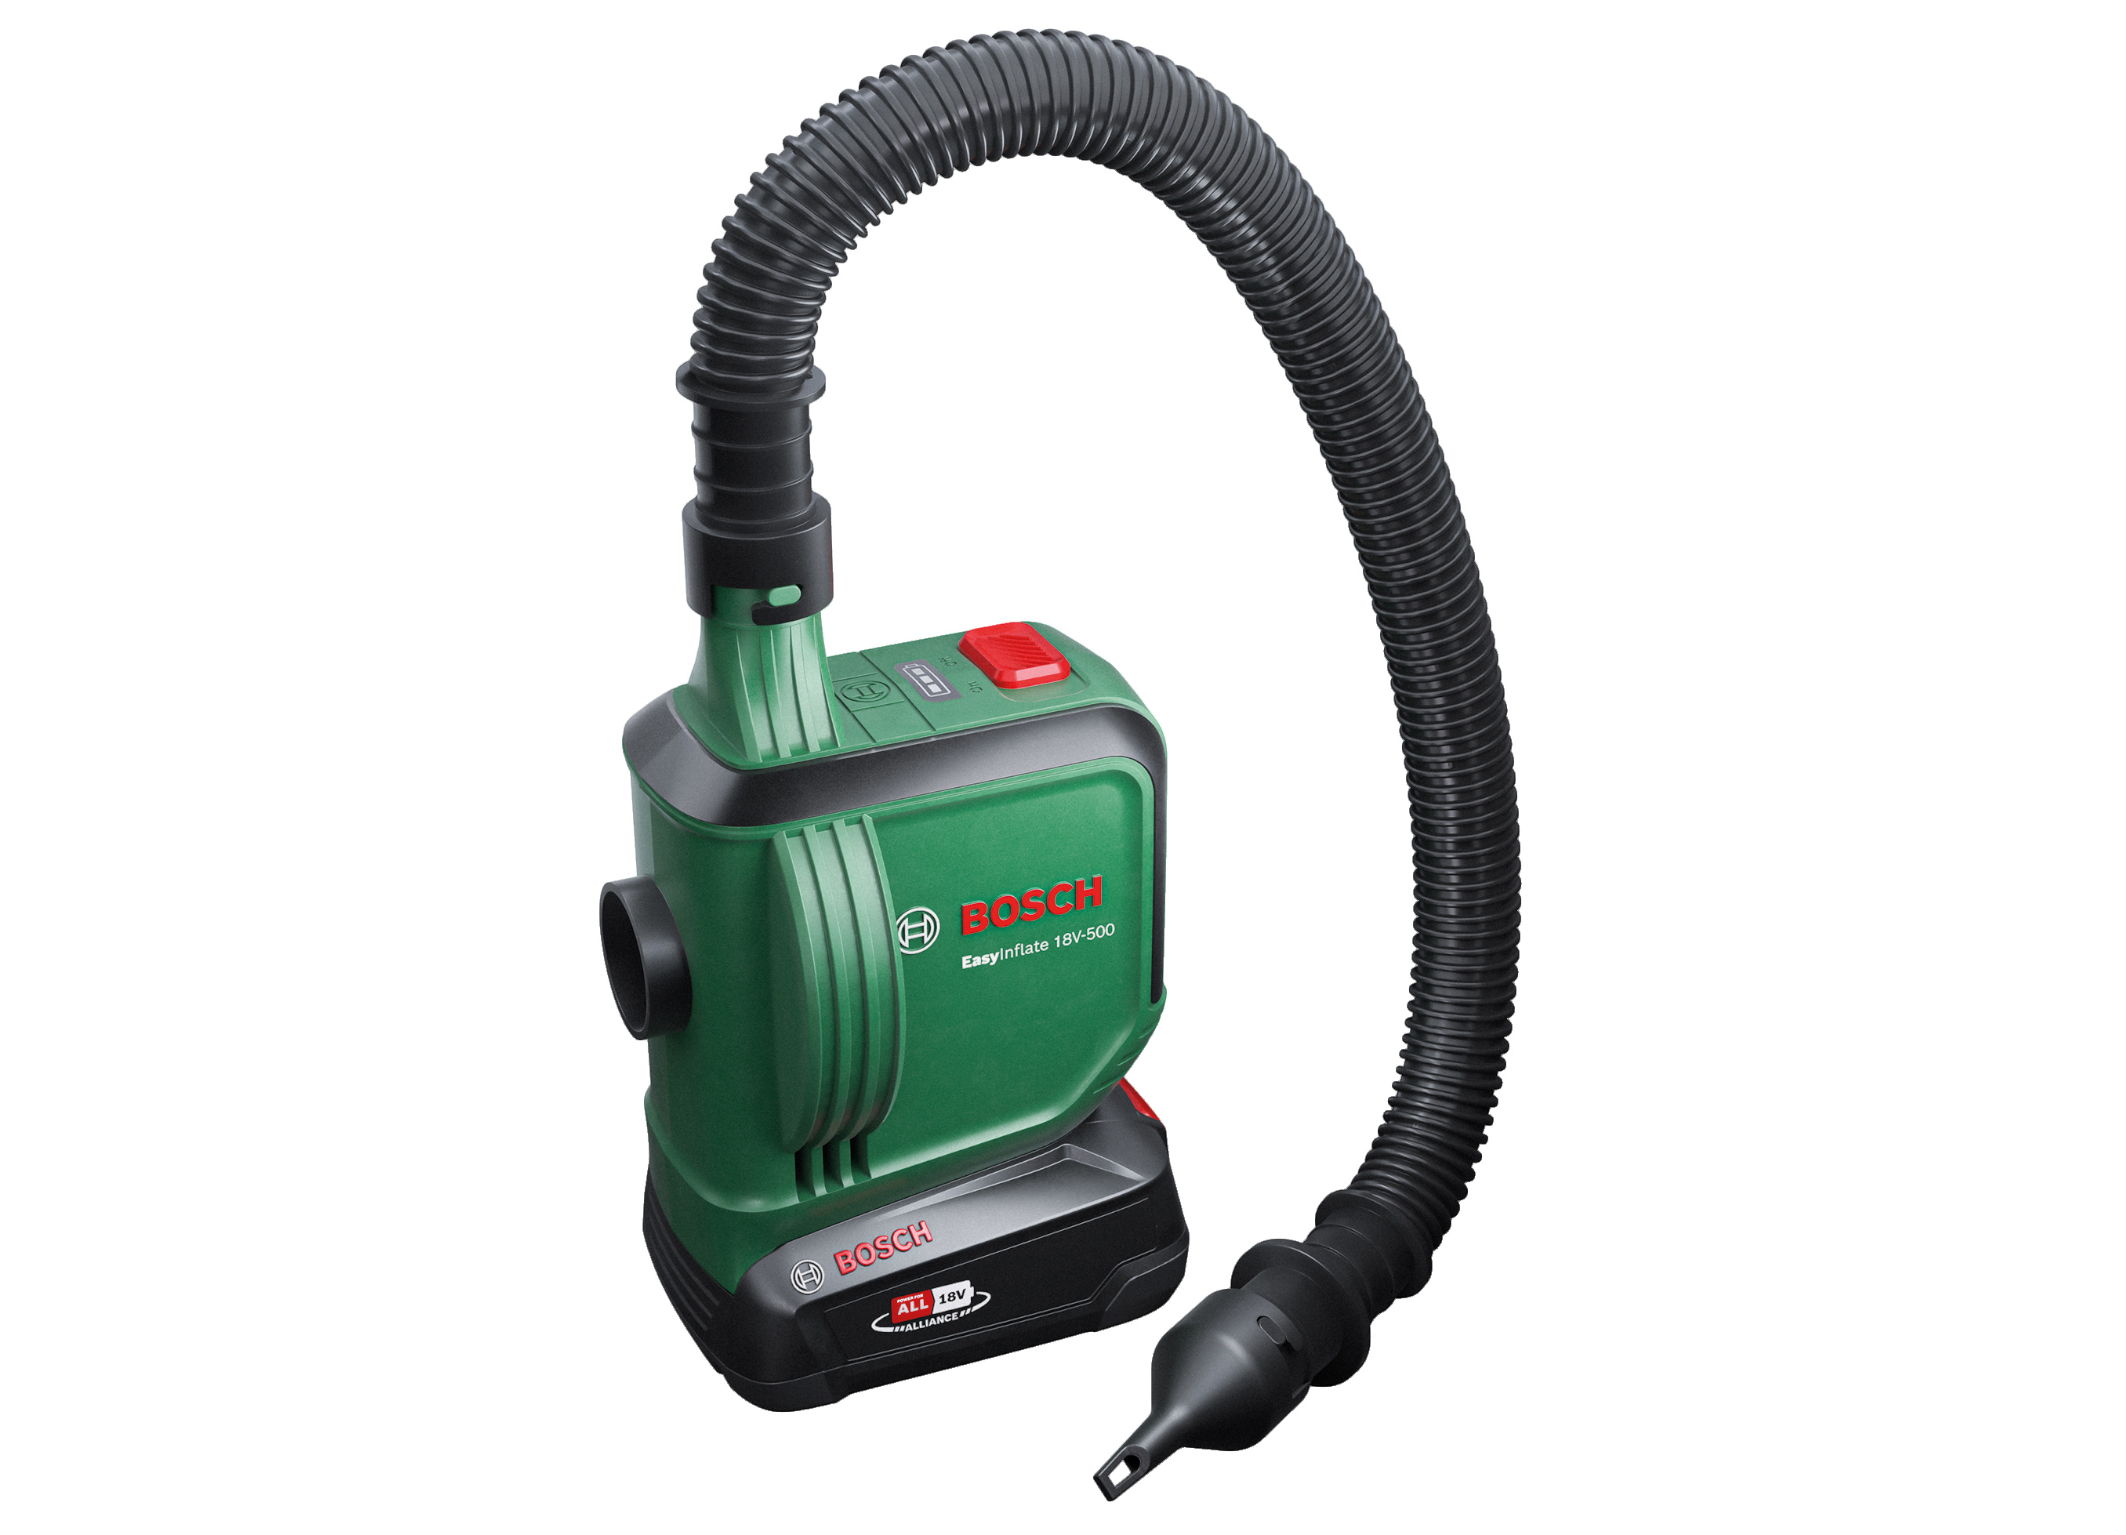 First volume pump in the '18V Power for All System': Bosch EasyInflate 18V- 500 for leisure equipment - Bosch Media Service